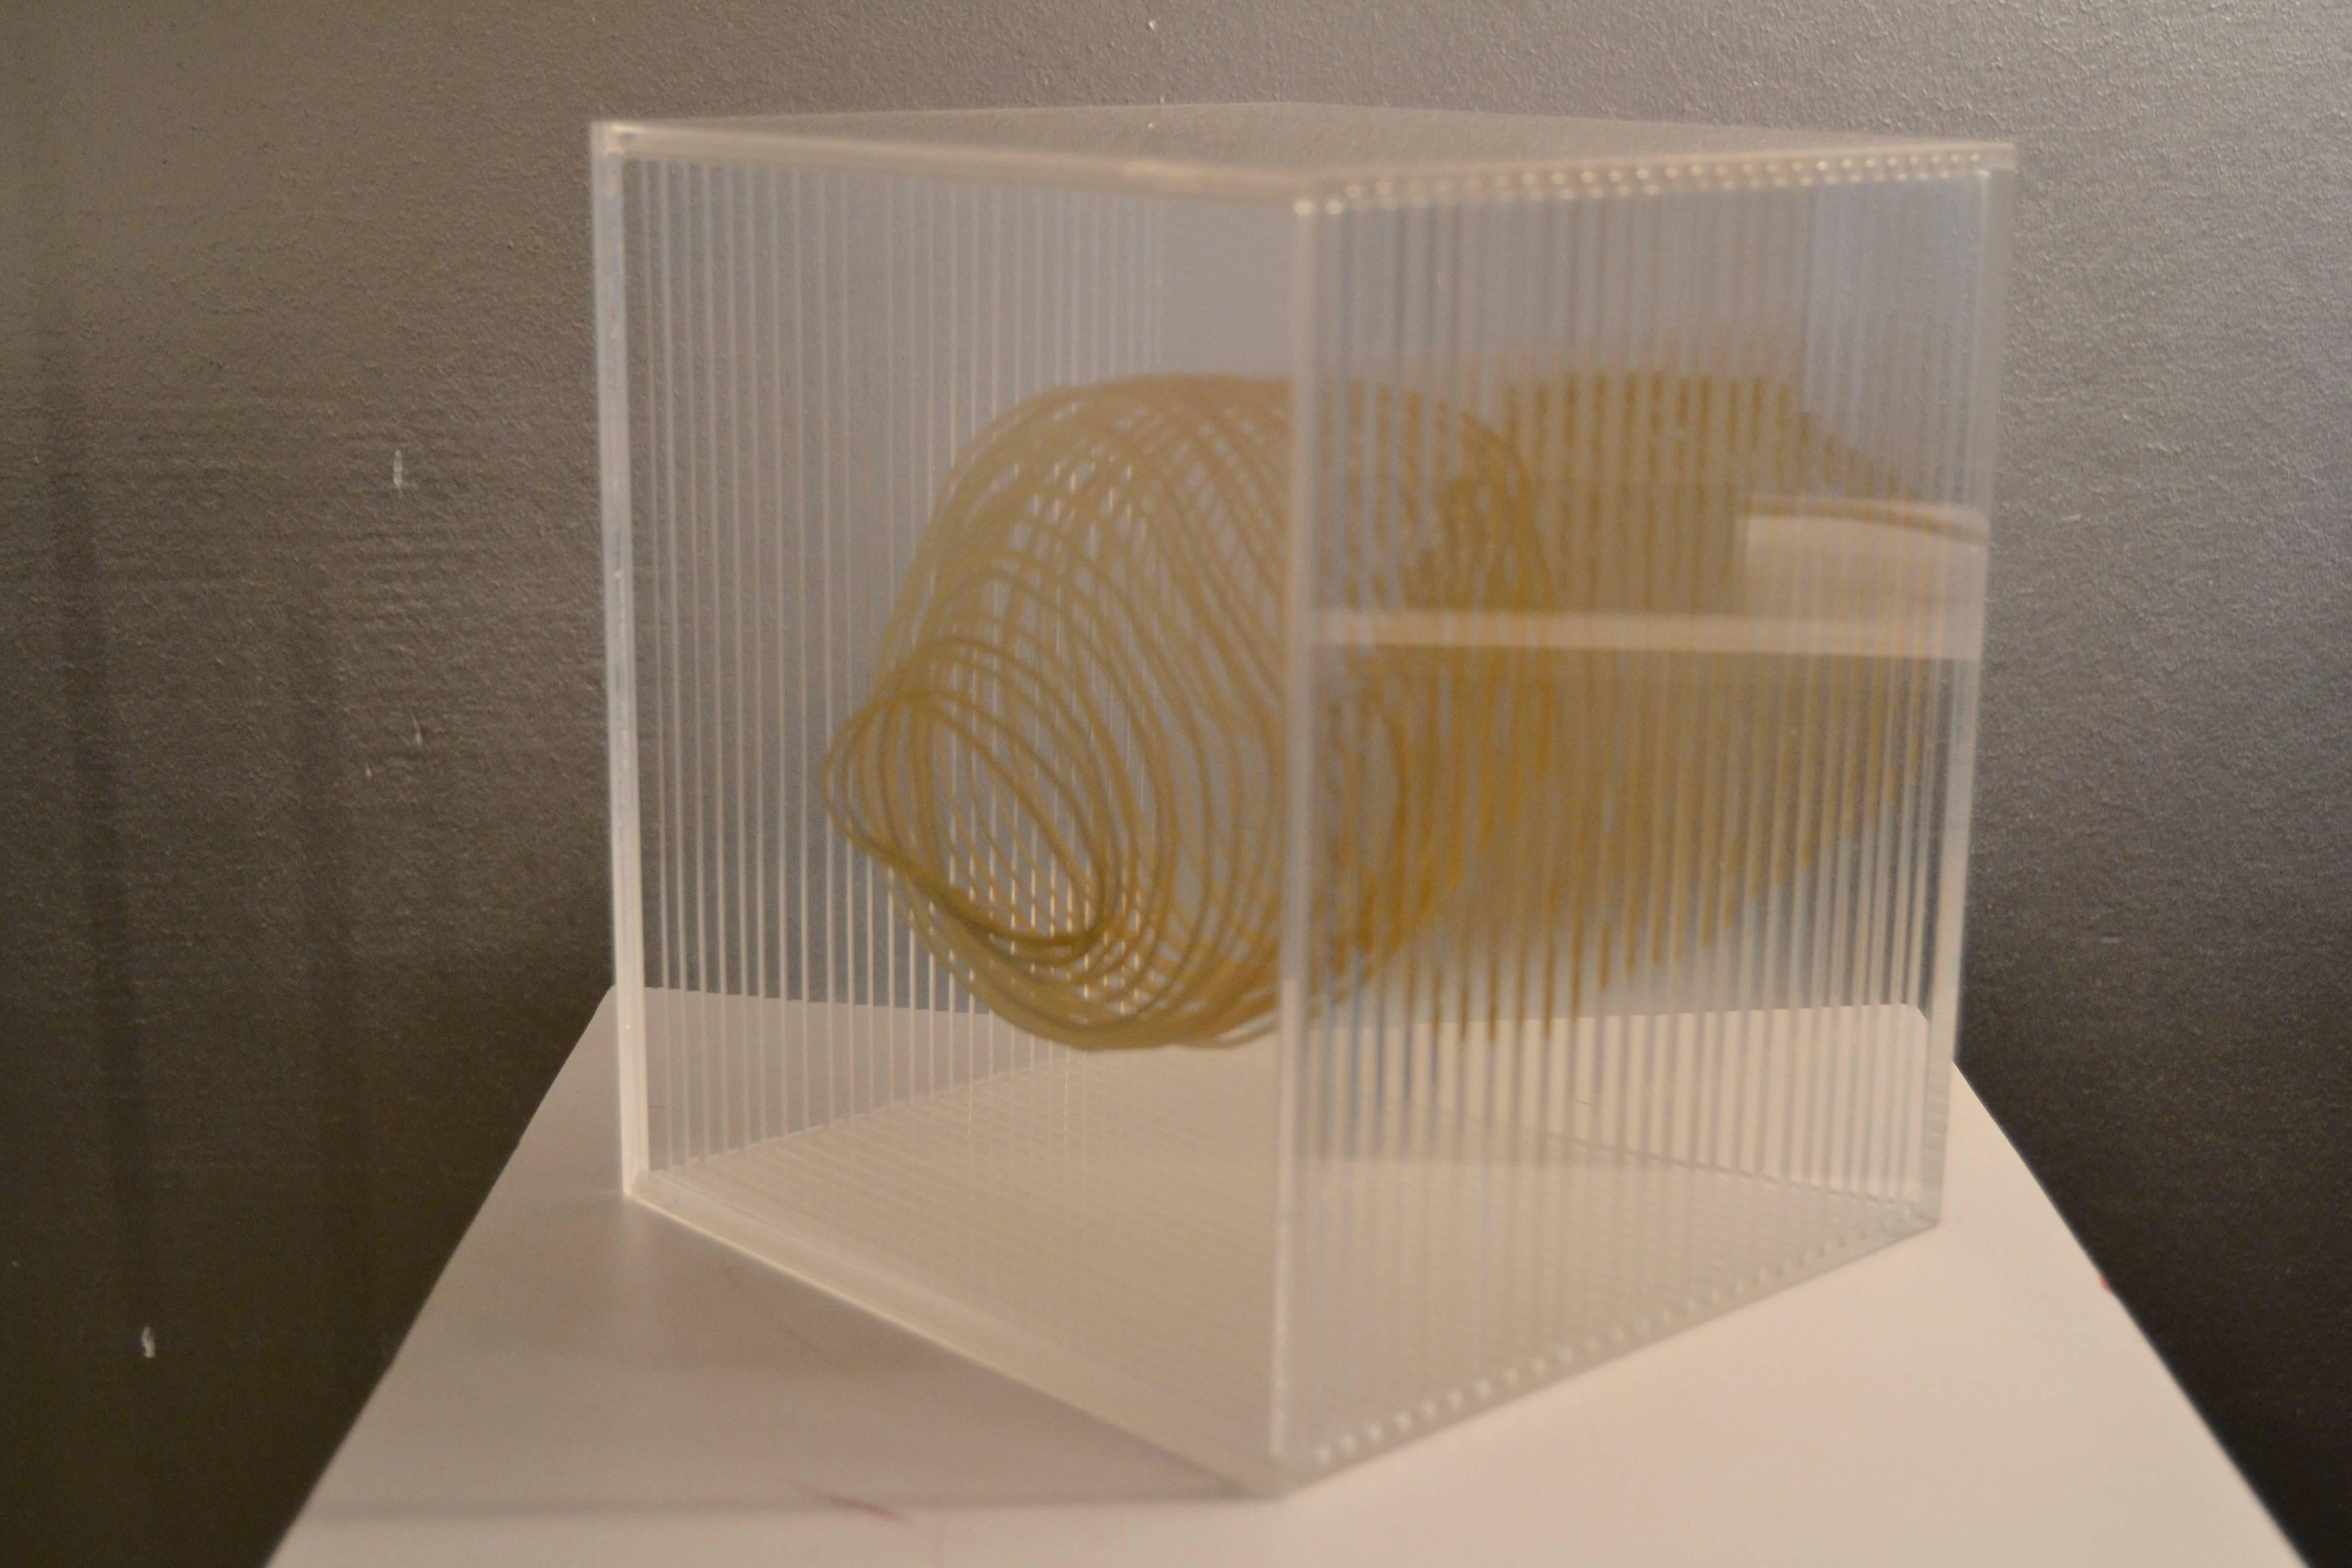 Contemporary Lucite sheets and gold leaf cube sculpture by the talented Spanish artist Isabel Alonso Vega.